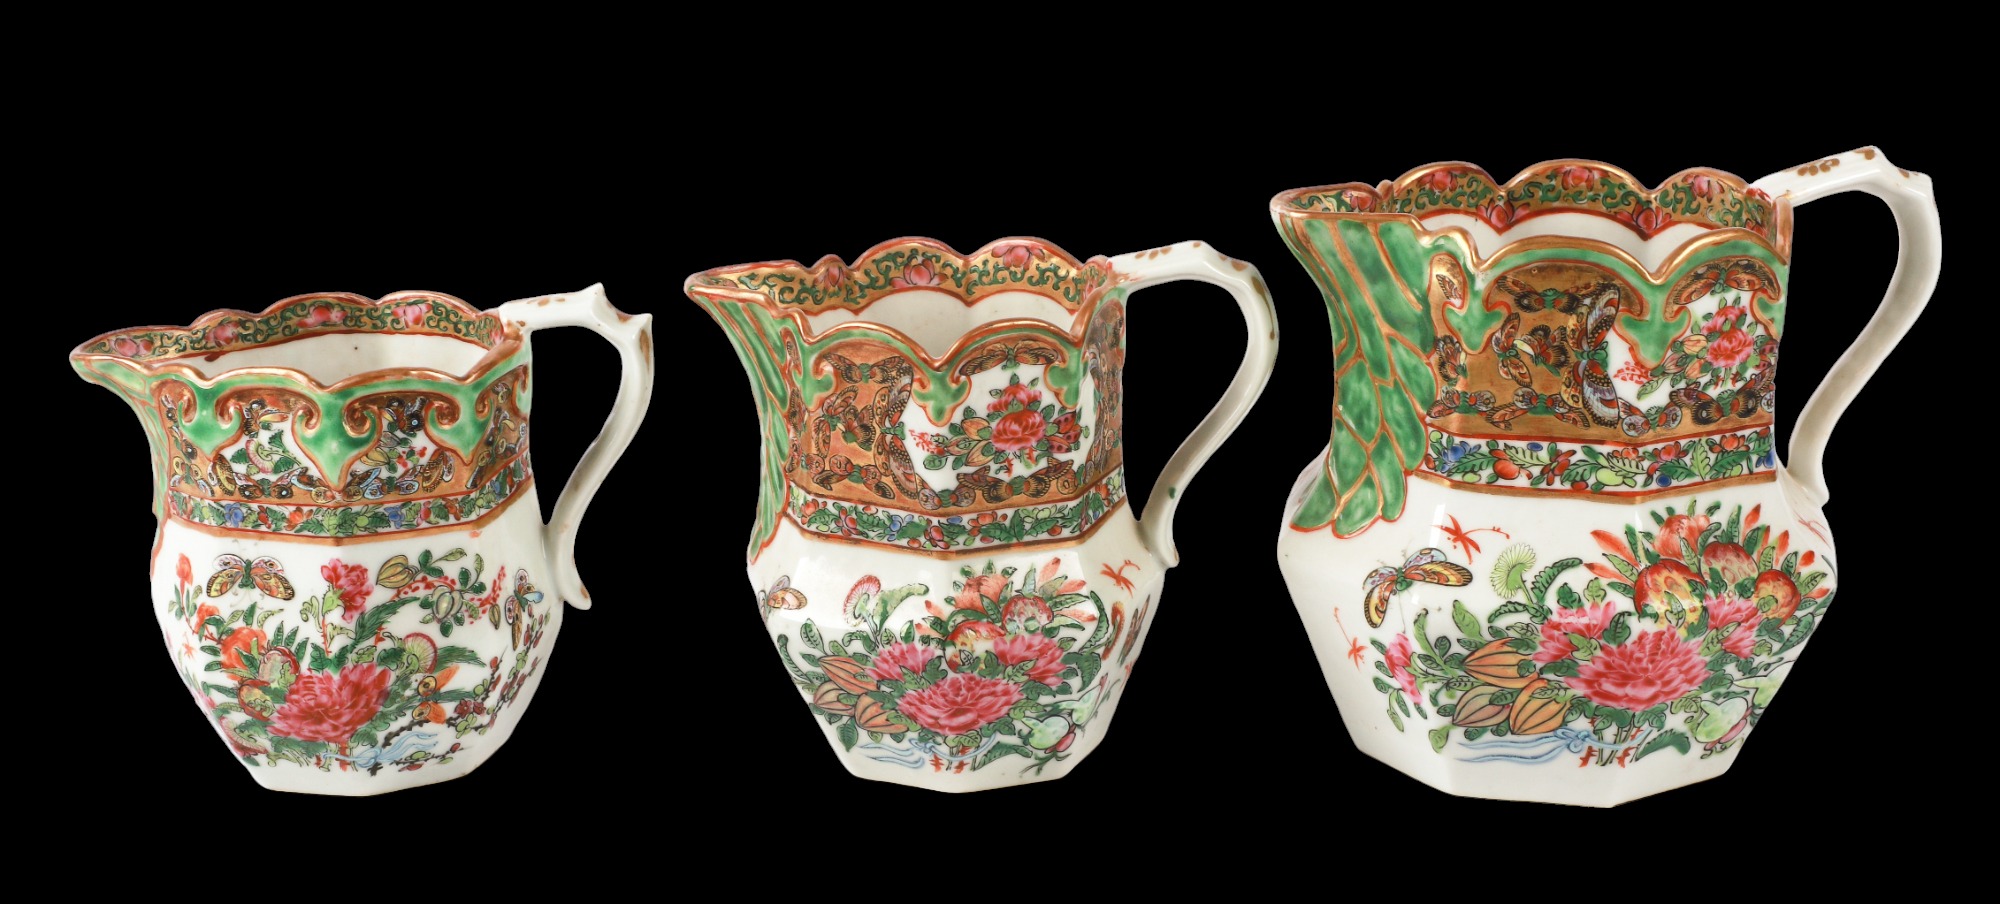 (3) Chinese Famille Rose porcelain